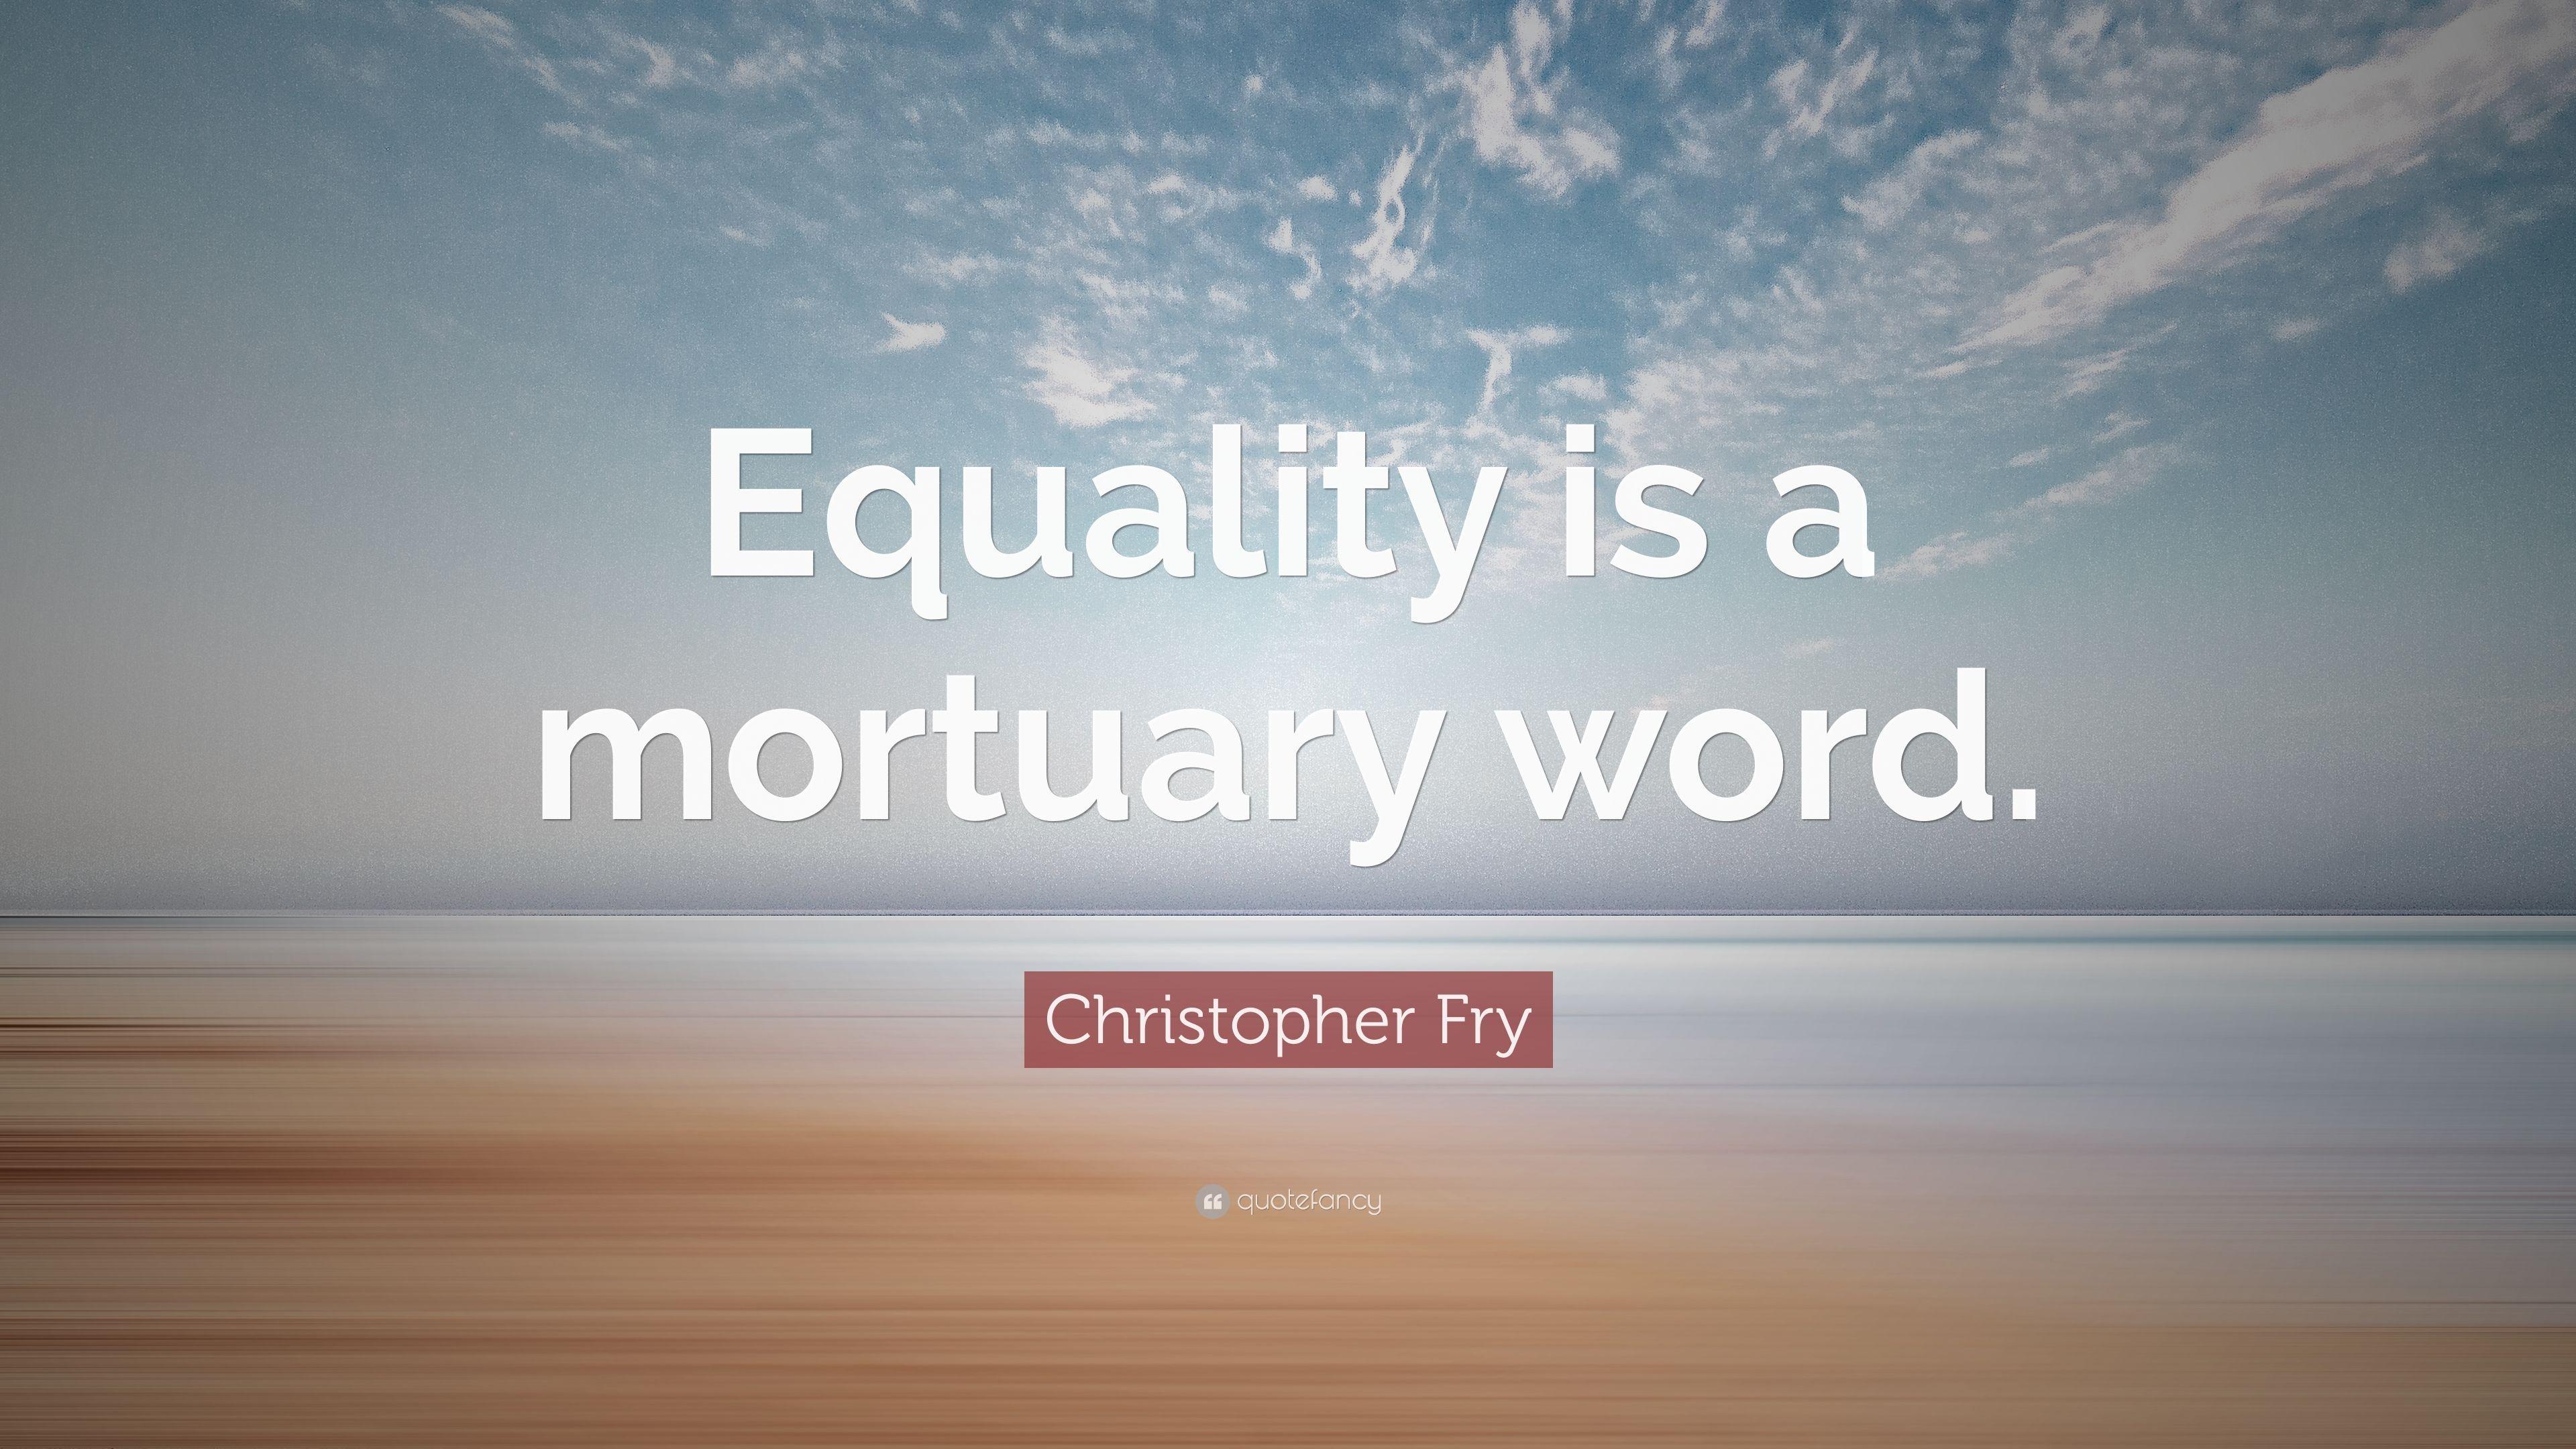 Christopher Fry Quote: “Equality is a mortuary word.” 7 wallpaper